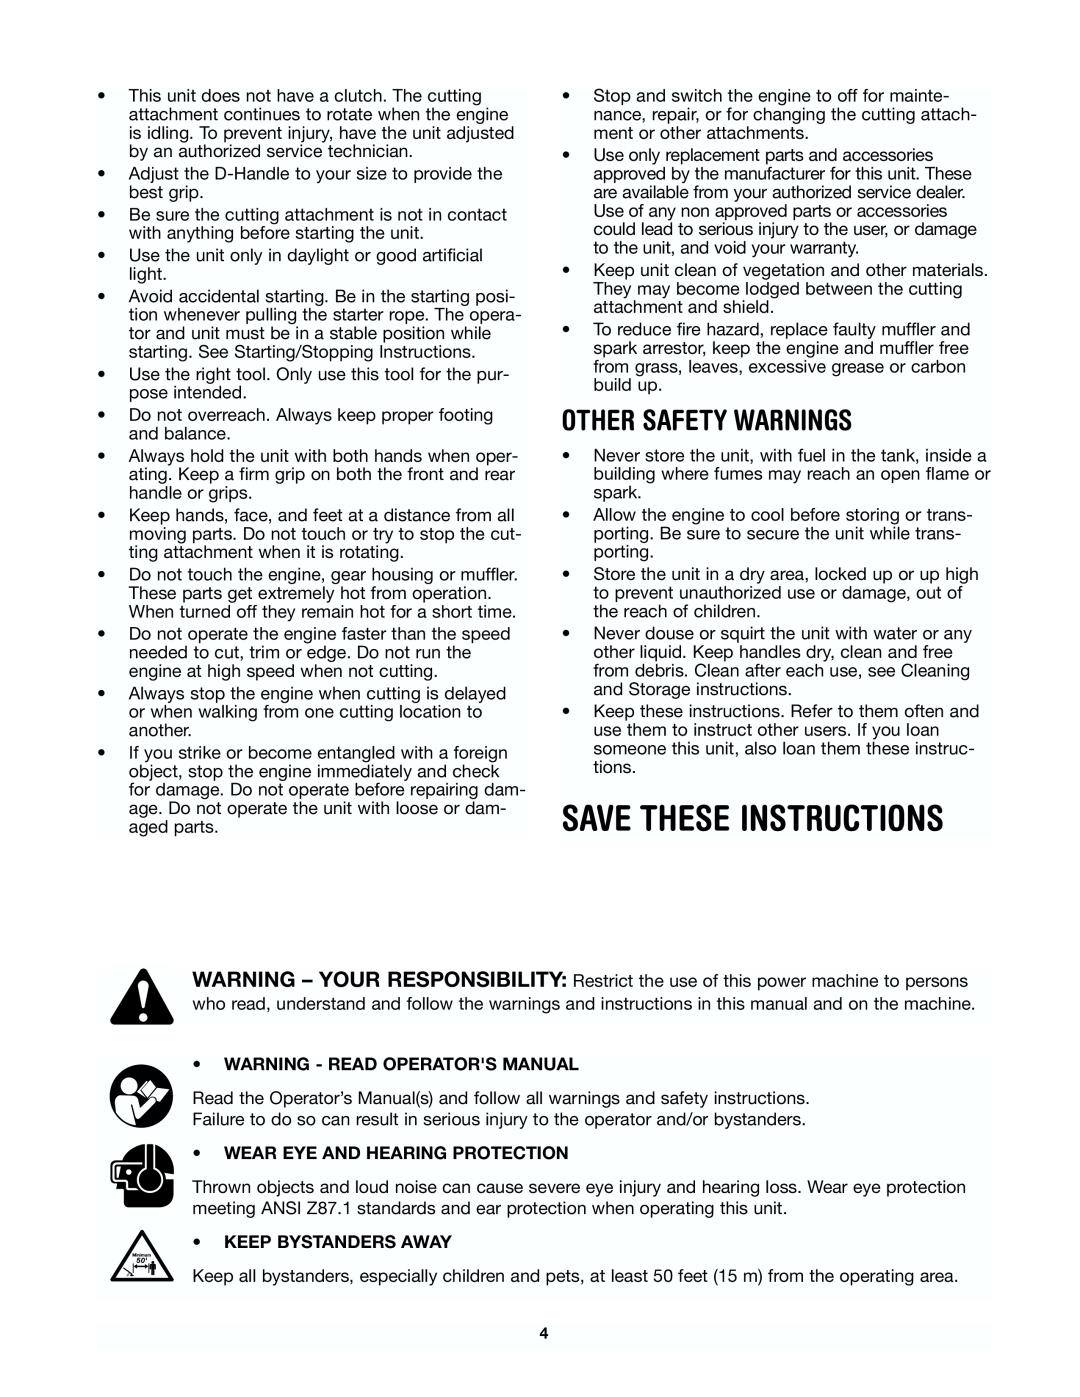 Yard Machines 41AD-280G000 manual Save These Instructions, Other Safety Warnings, Warning - Read Operators Manual 